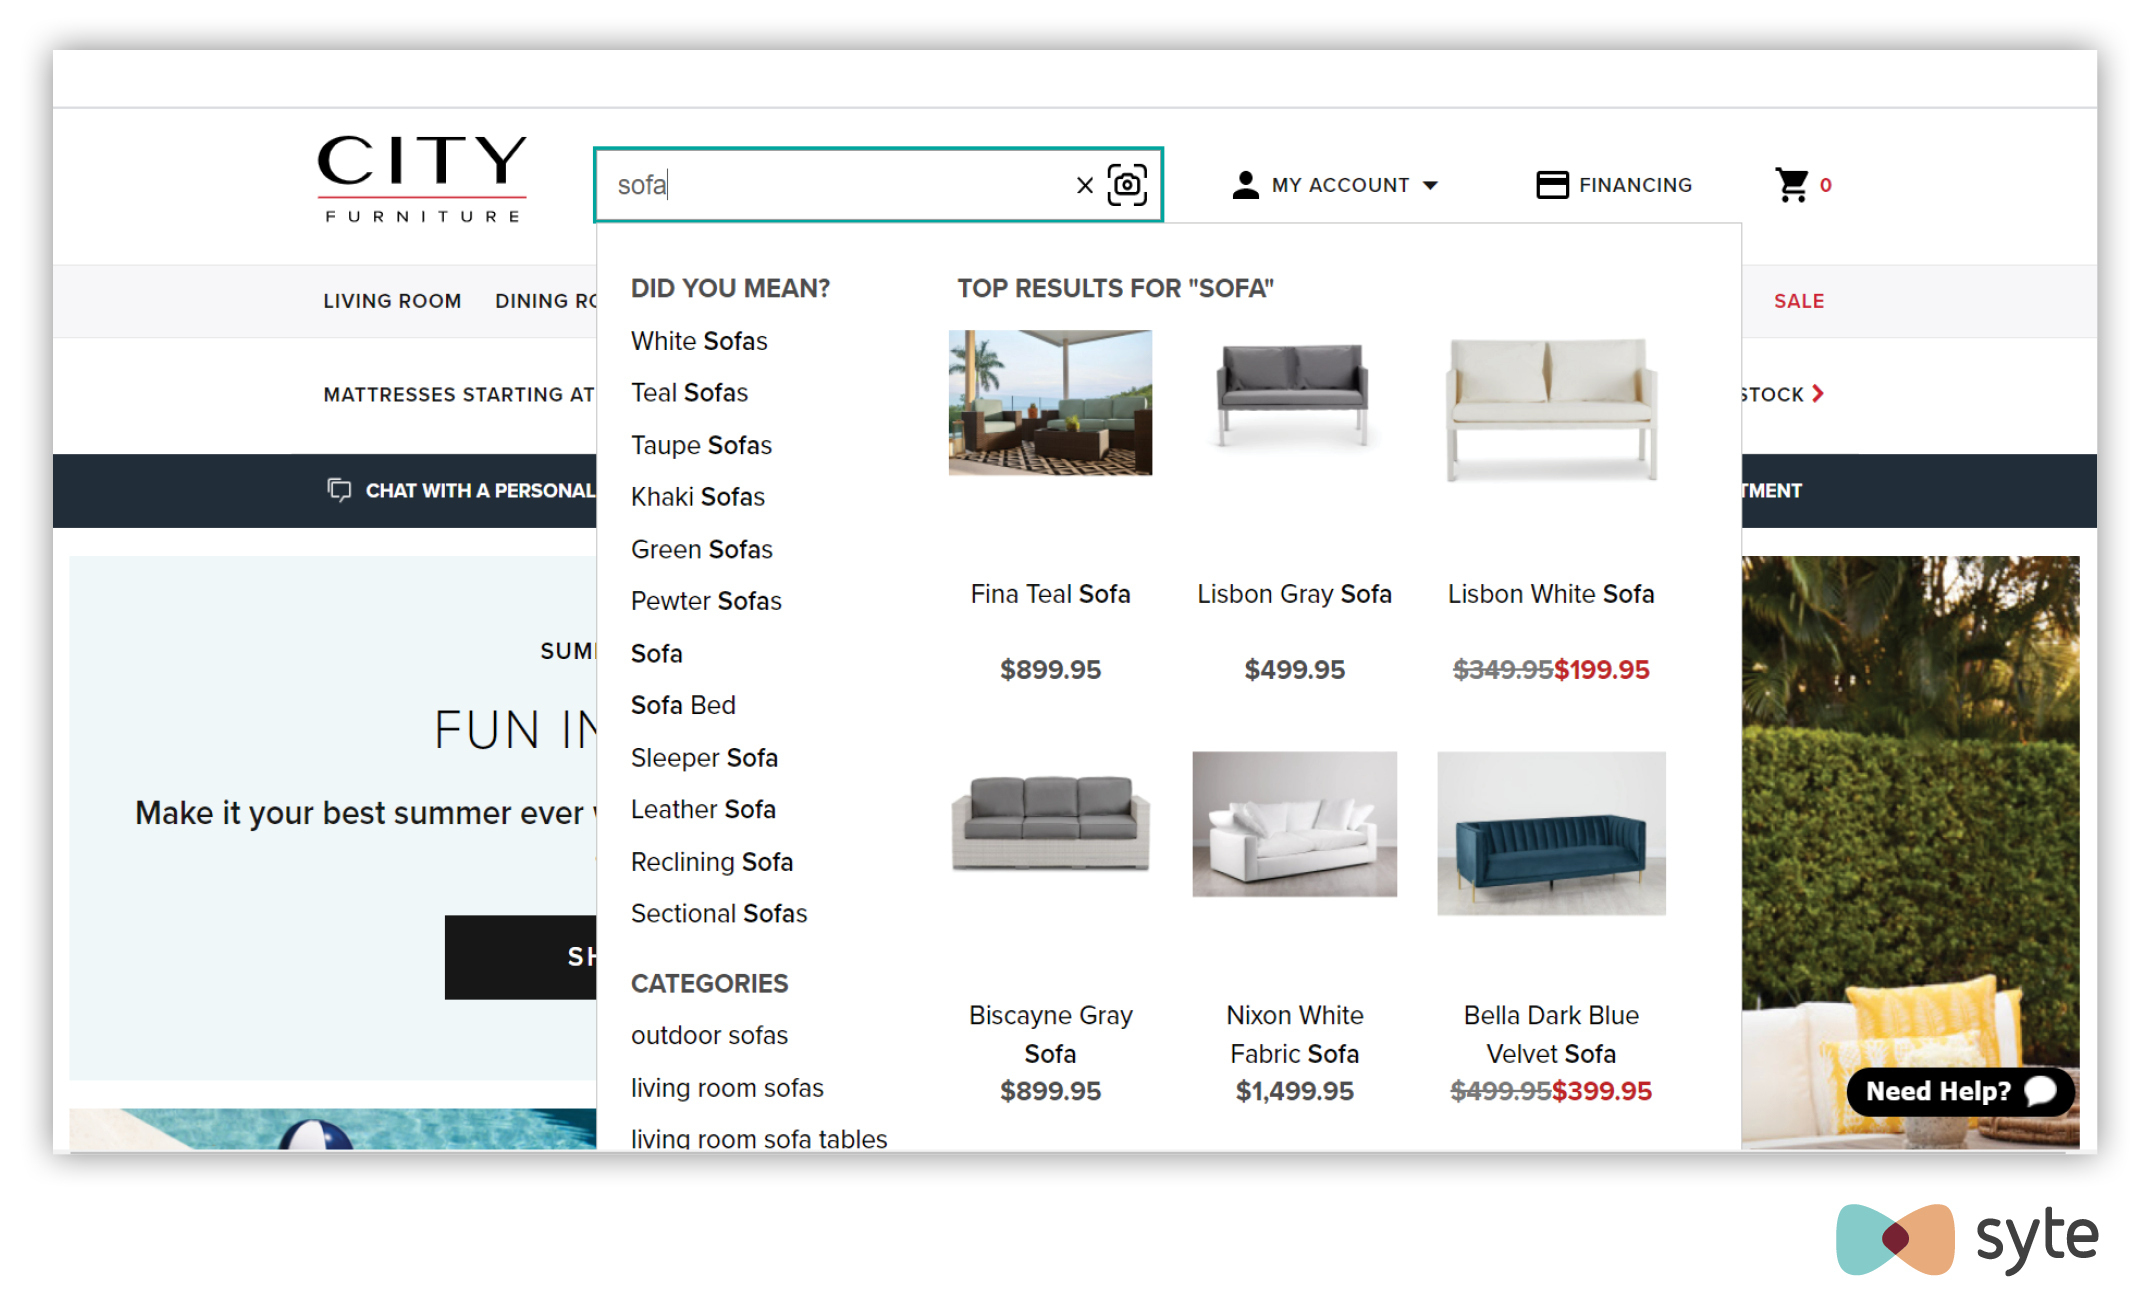 City Furniture showing one of many eCommerce UX best practices